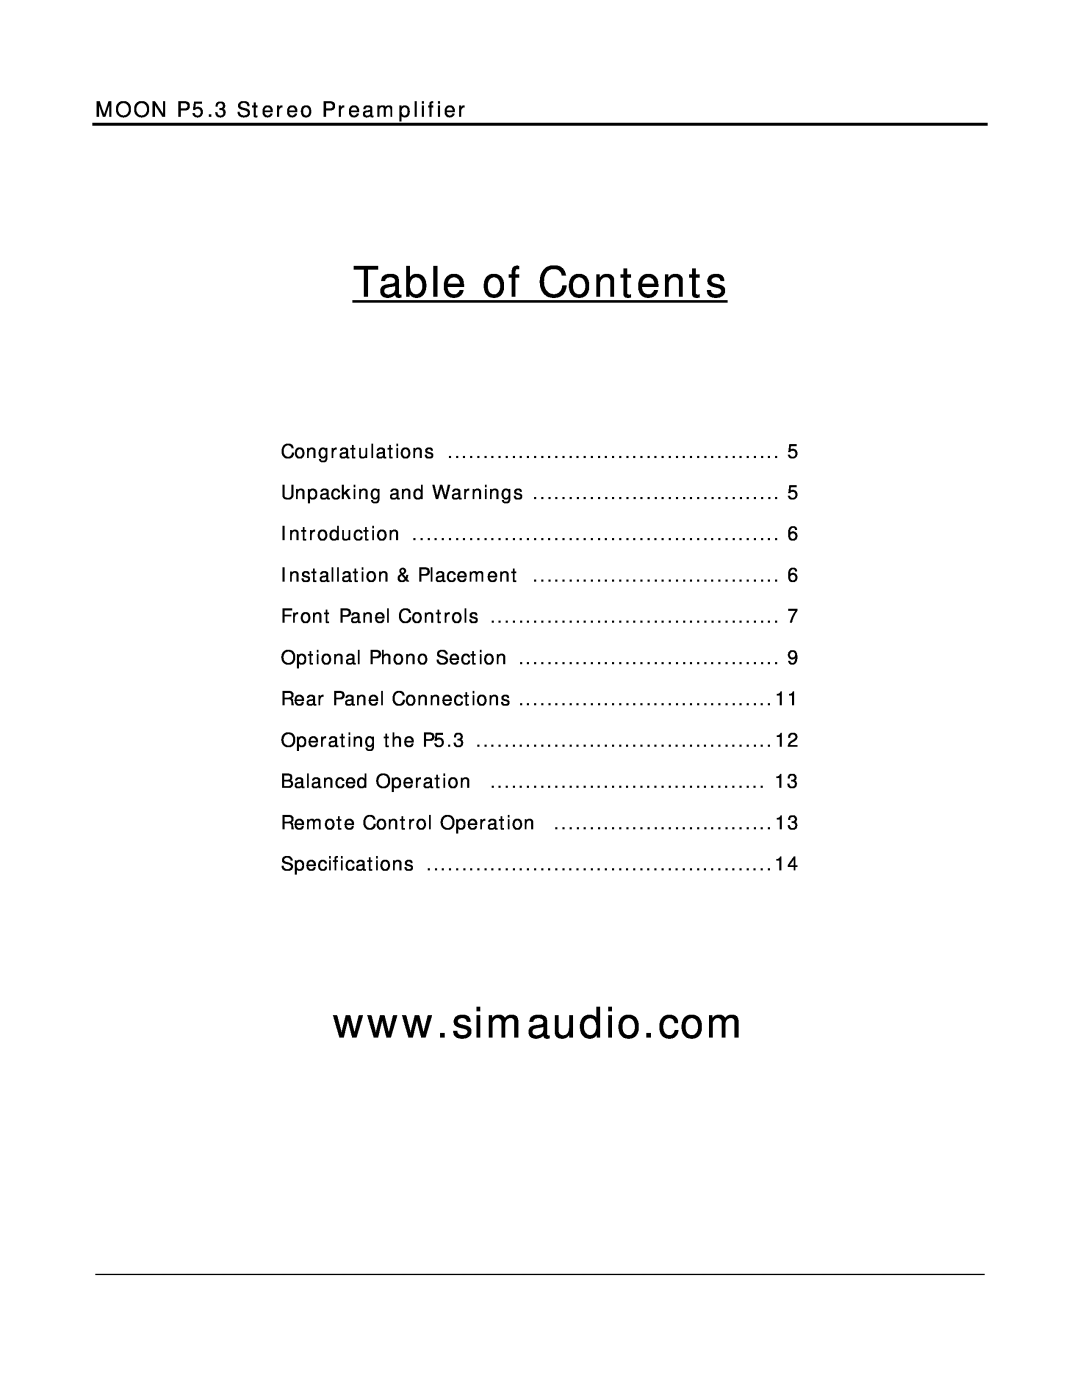 Simaudio P 5.3 owner manual Table of Contents, MOON P5.3 Stereo Preamplifier 